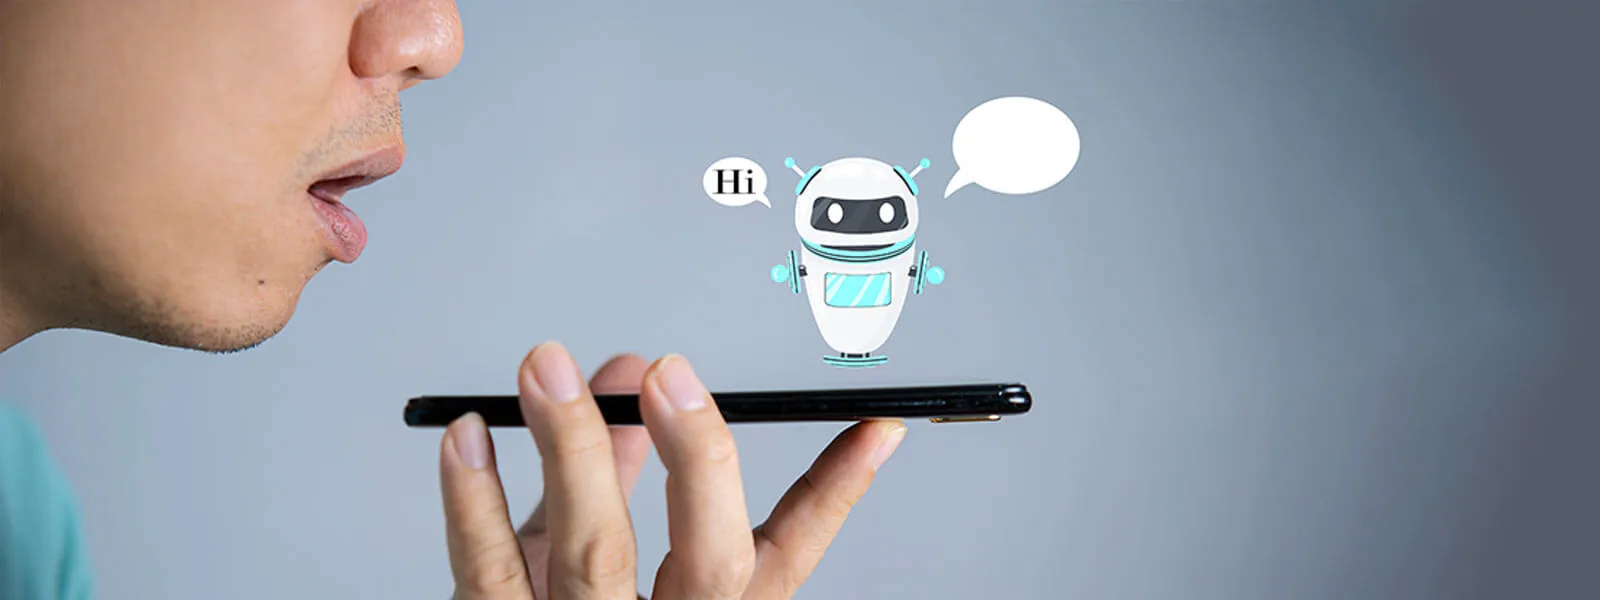 Difference between banner chatbot and voicebot